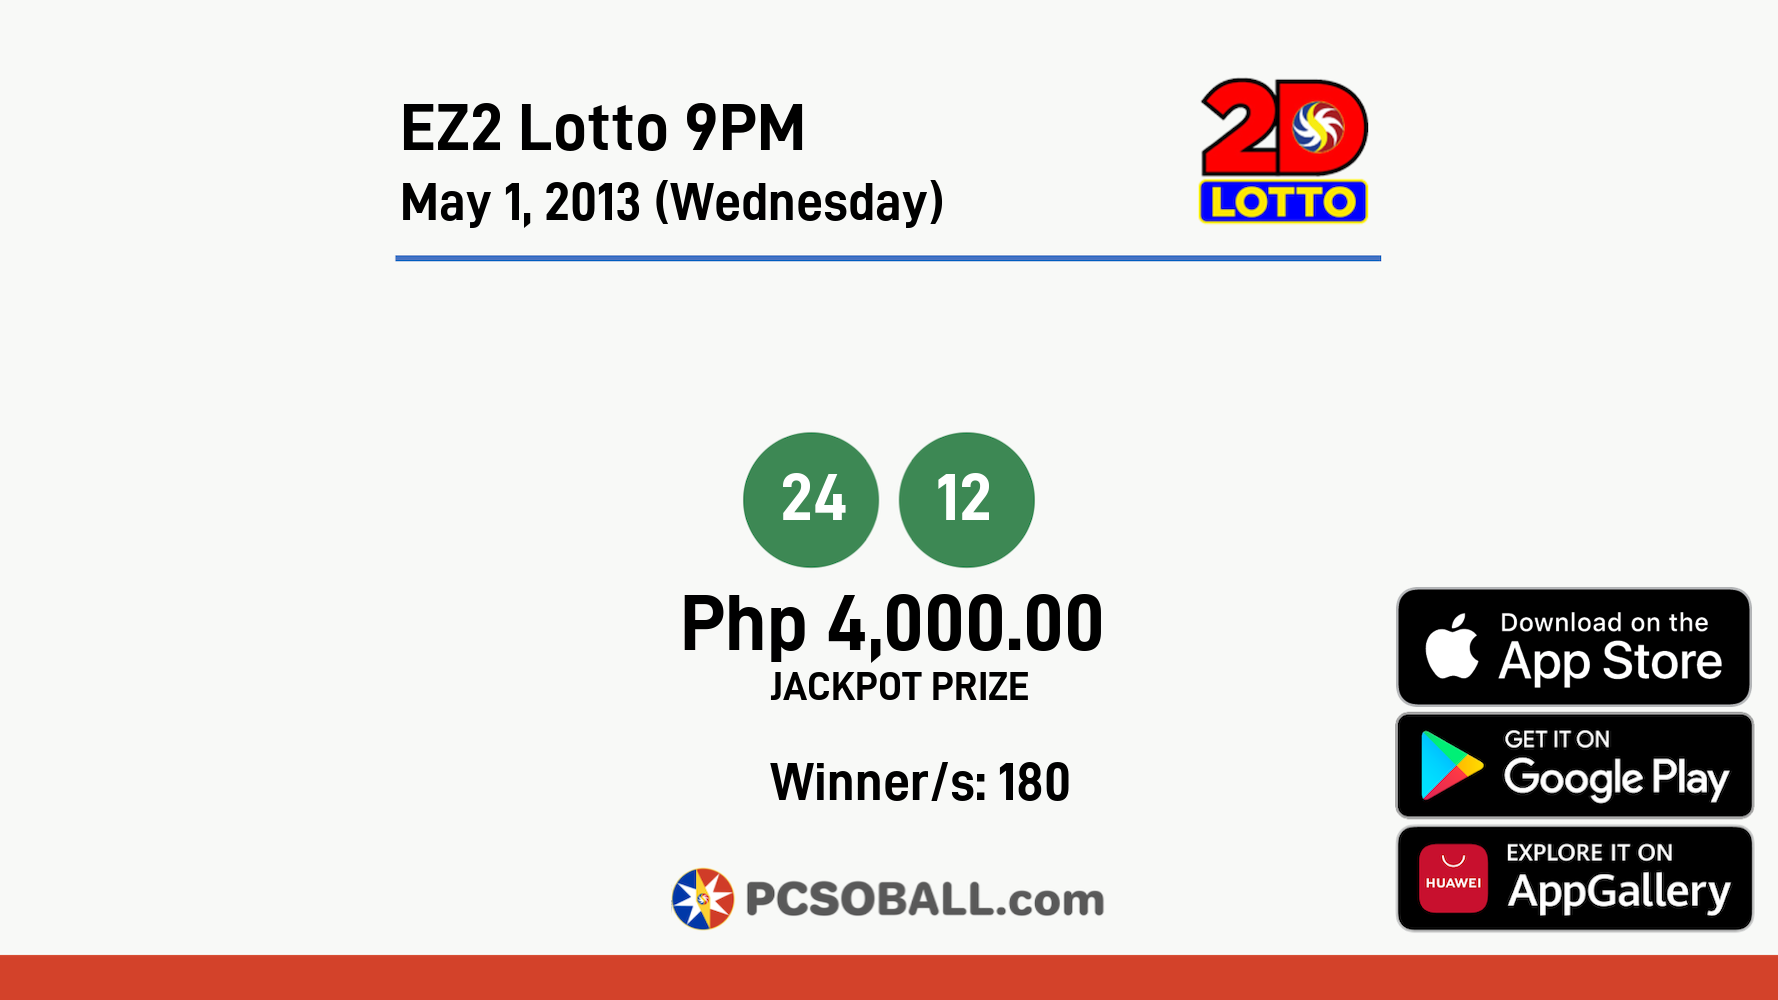 EZ2 Lotto 9PM May 1, 2013 (Wednesday) Result